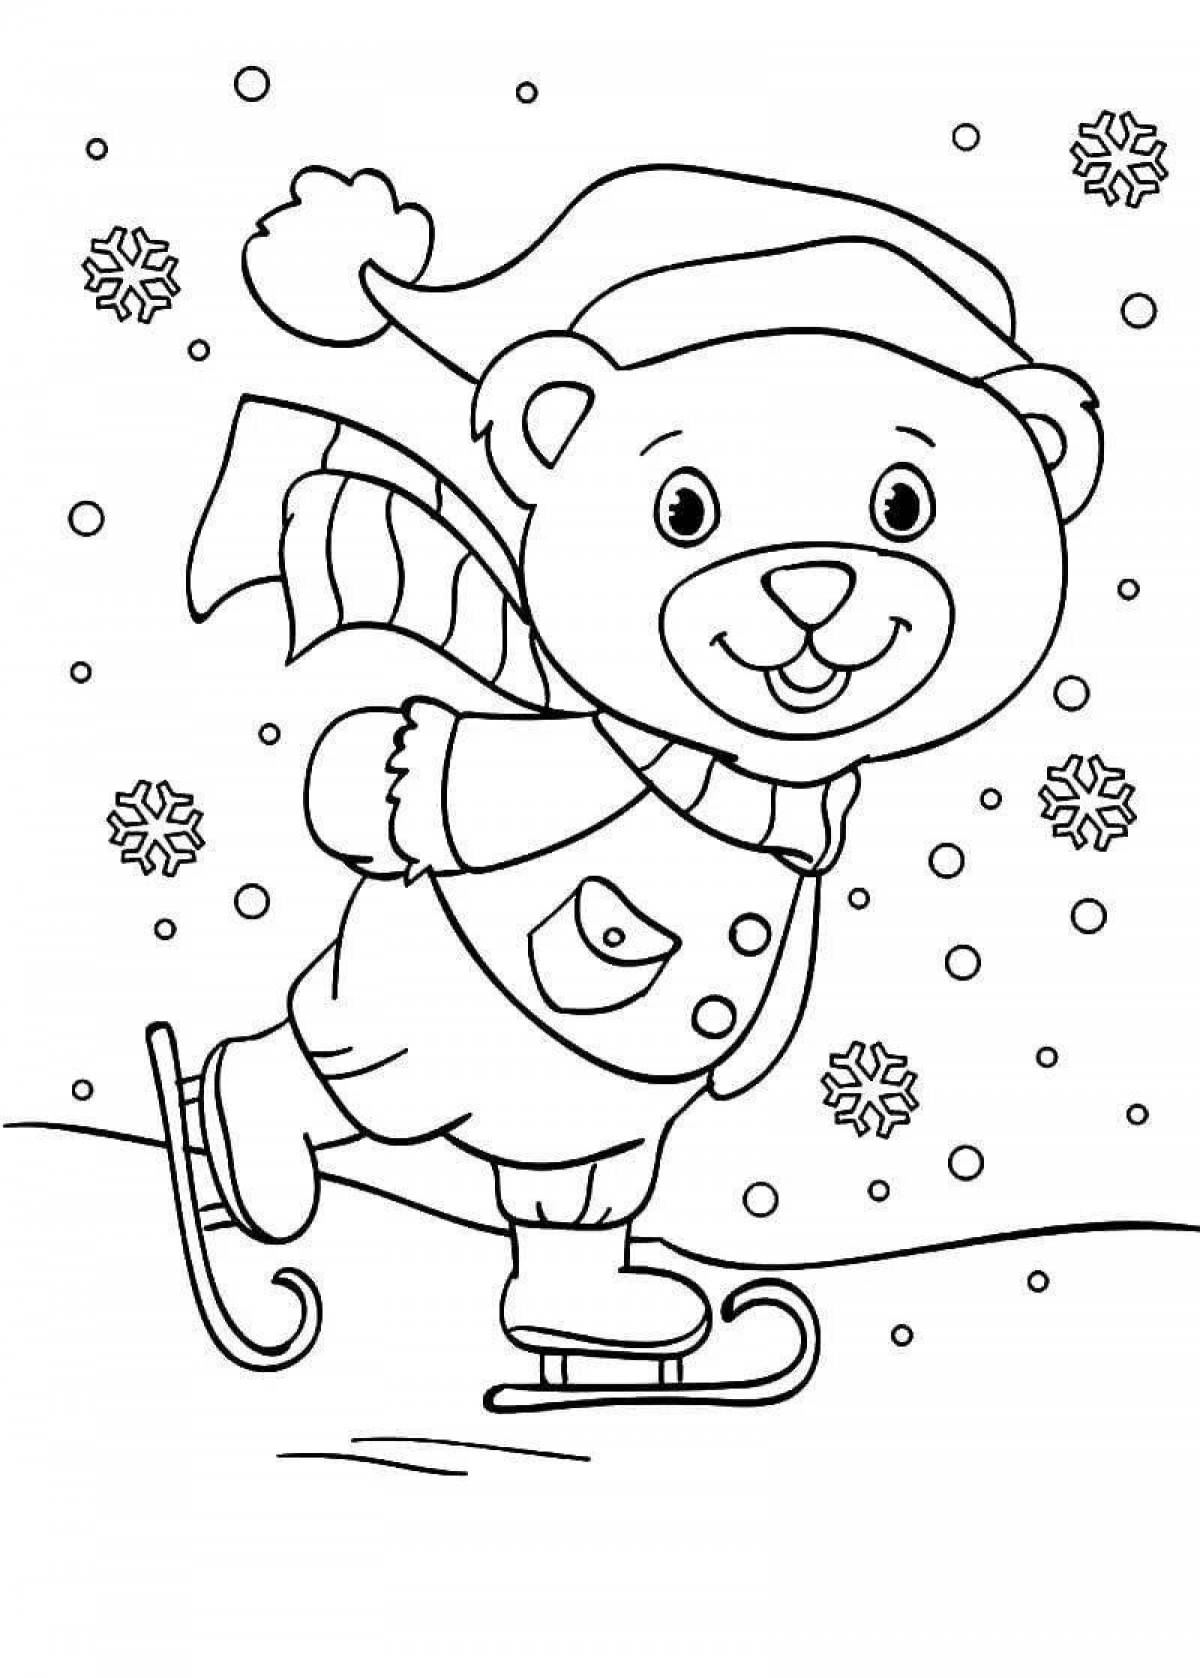 Coloring page adorable teddy bear on skis